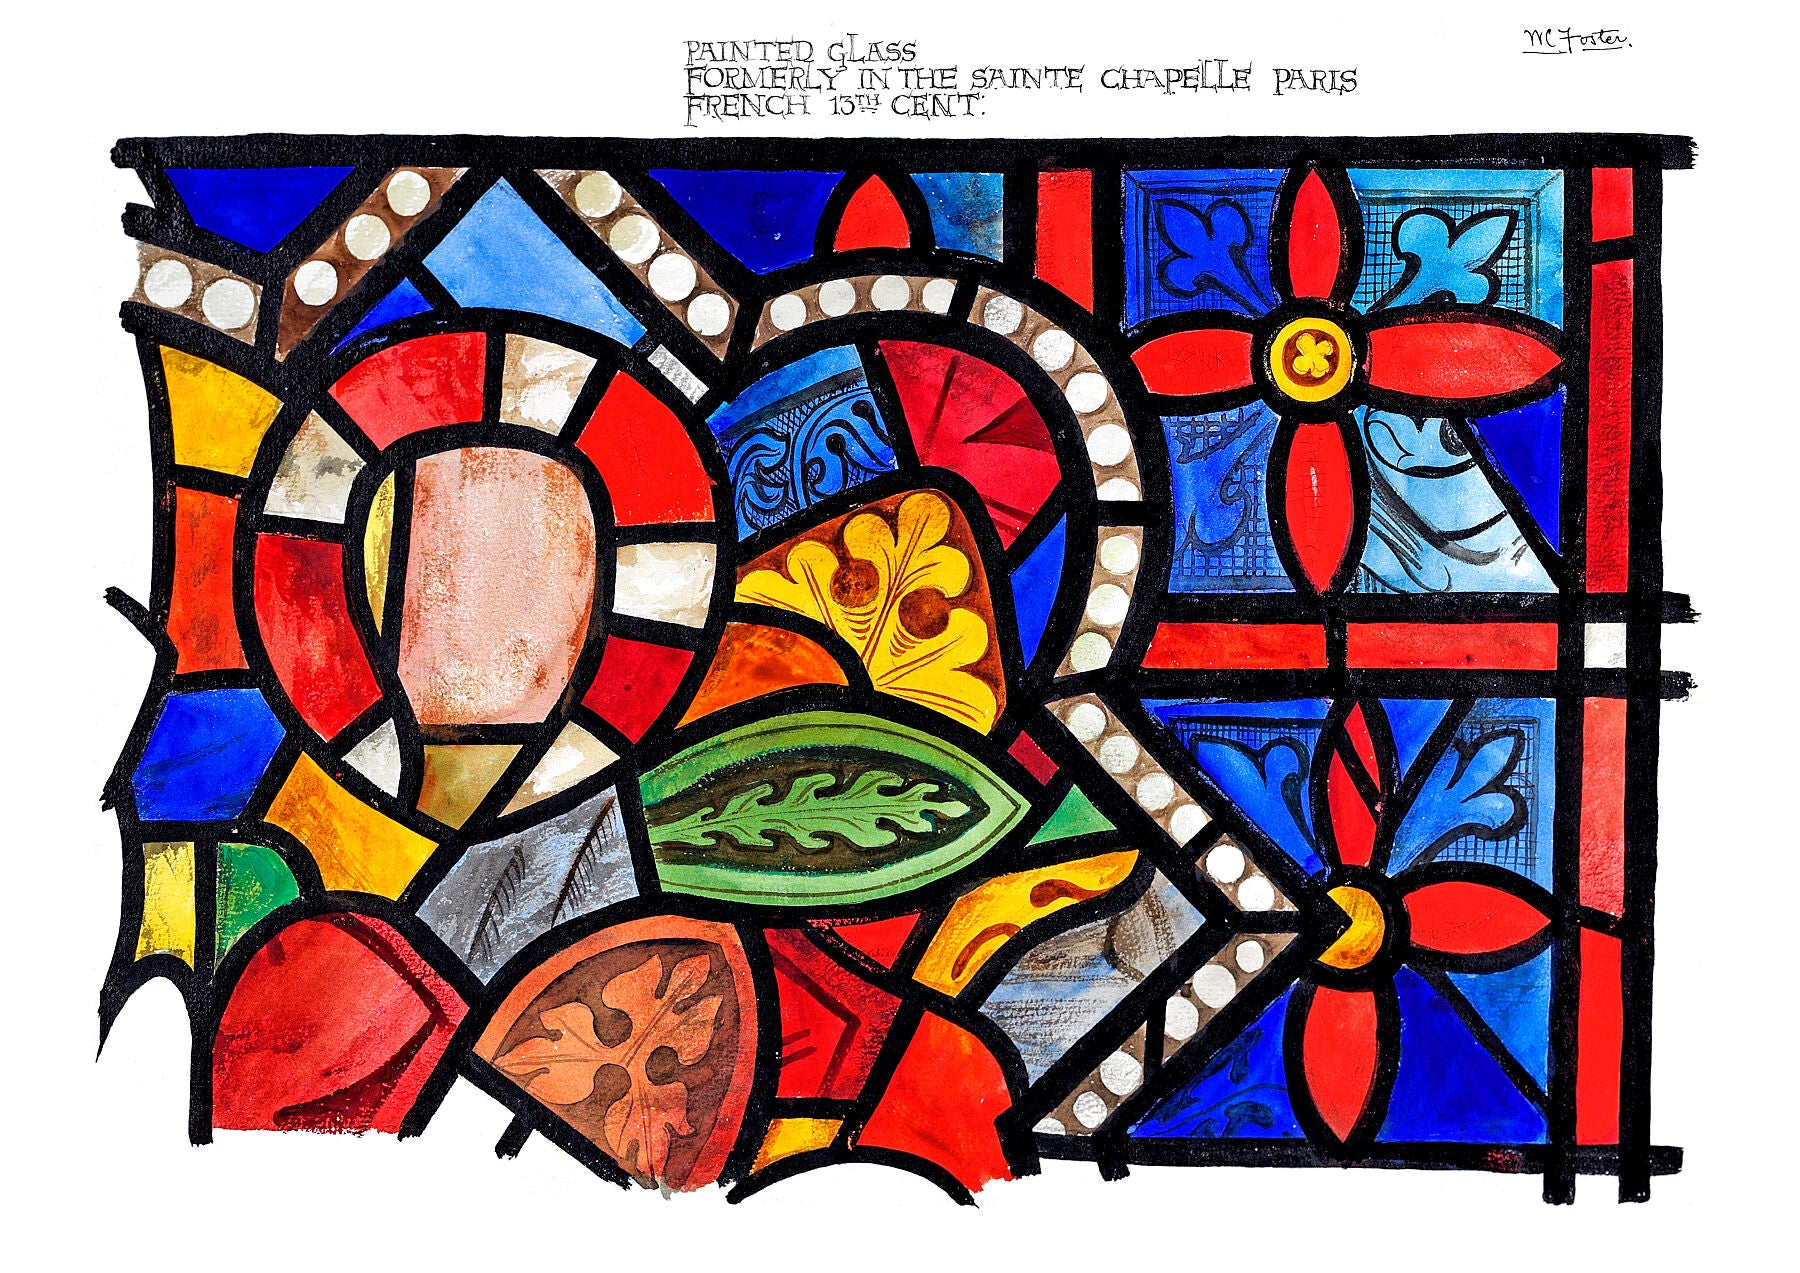 Reproduction of painted glass from Sainte Chapelle, Paris by Walter C Foster